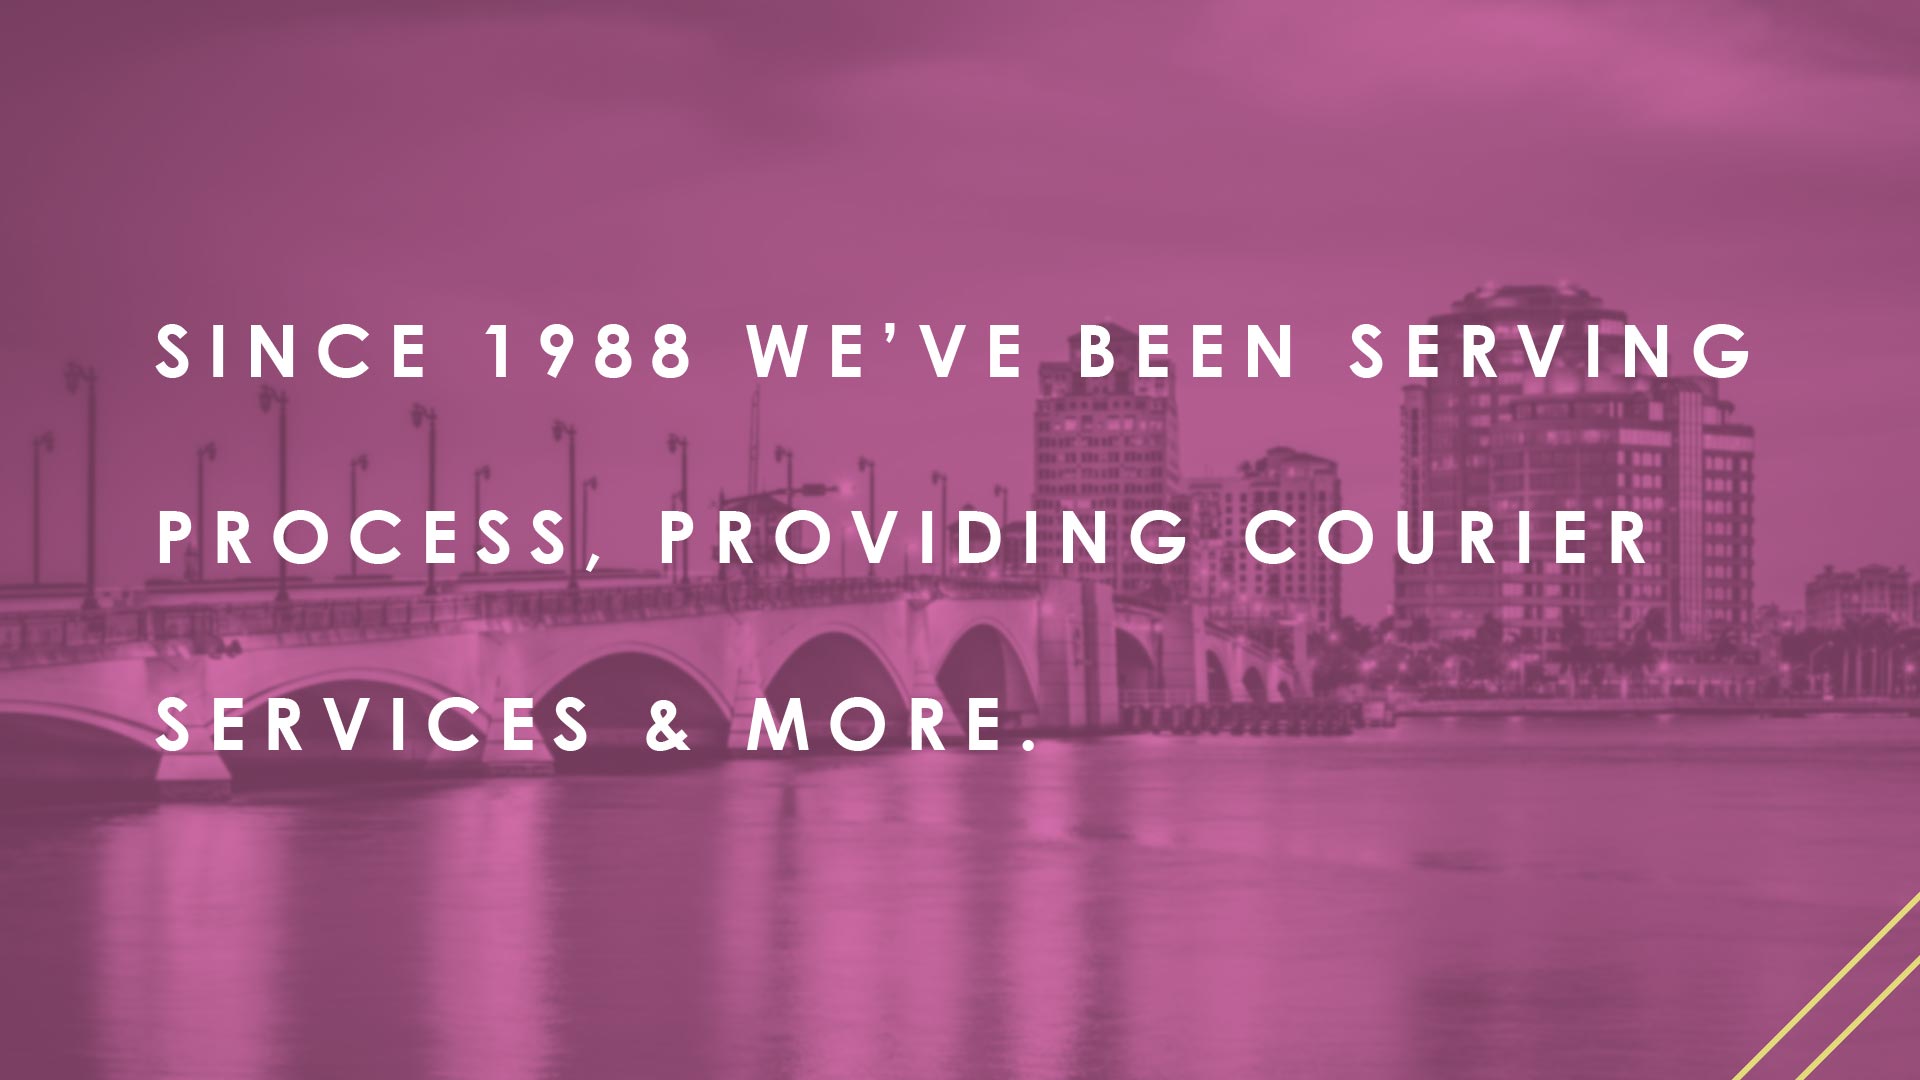 Since 1988 Signed Sealed & Delivered has been serving process, providing courier services and much more.